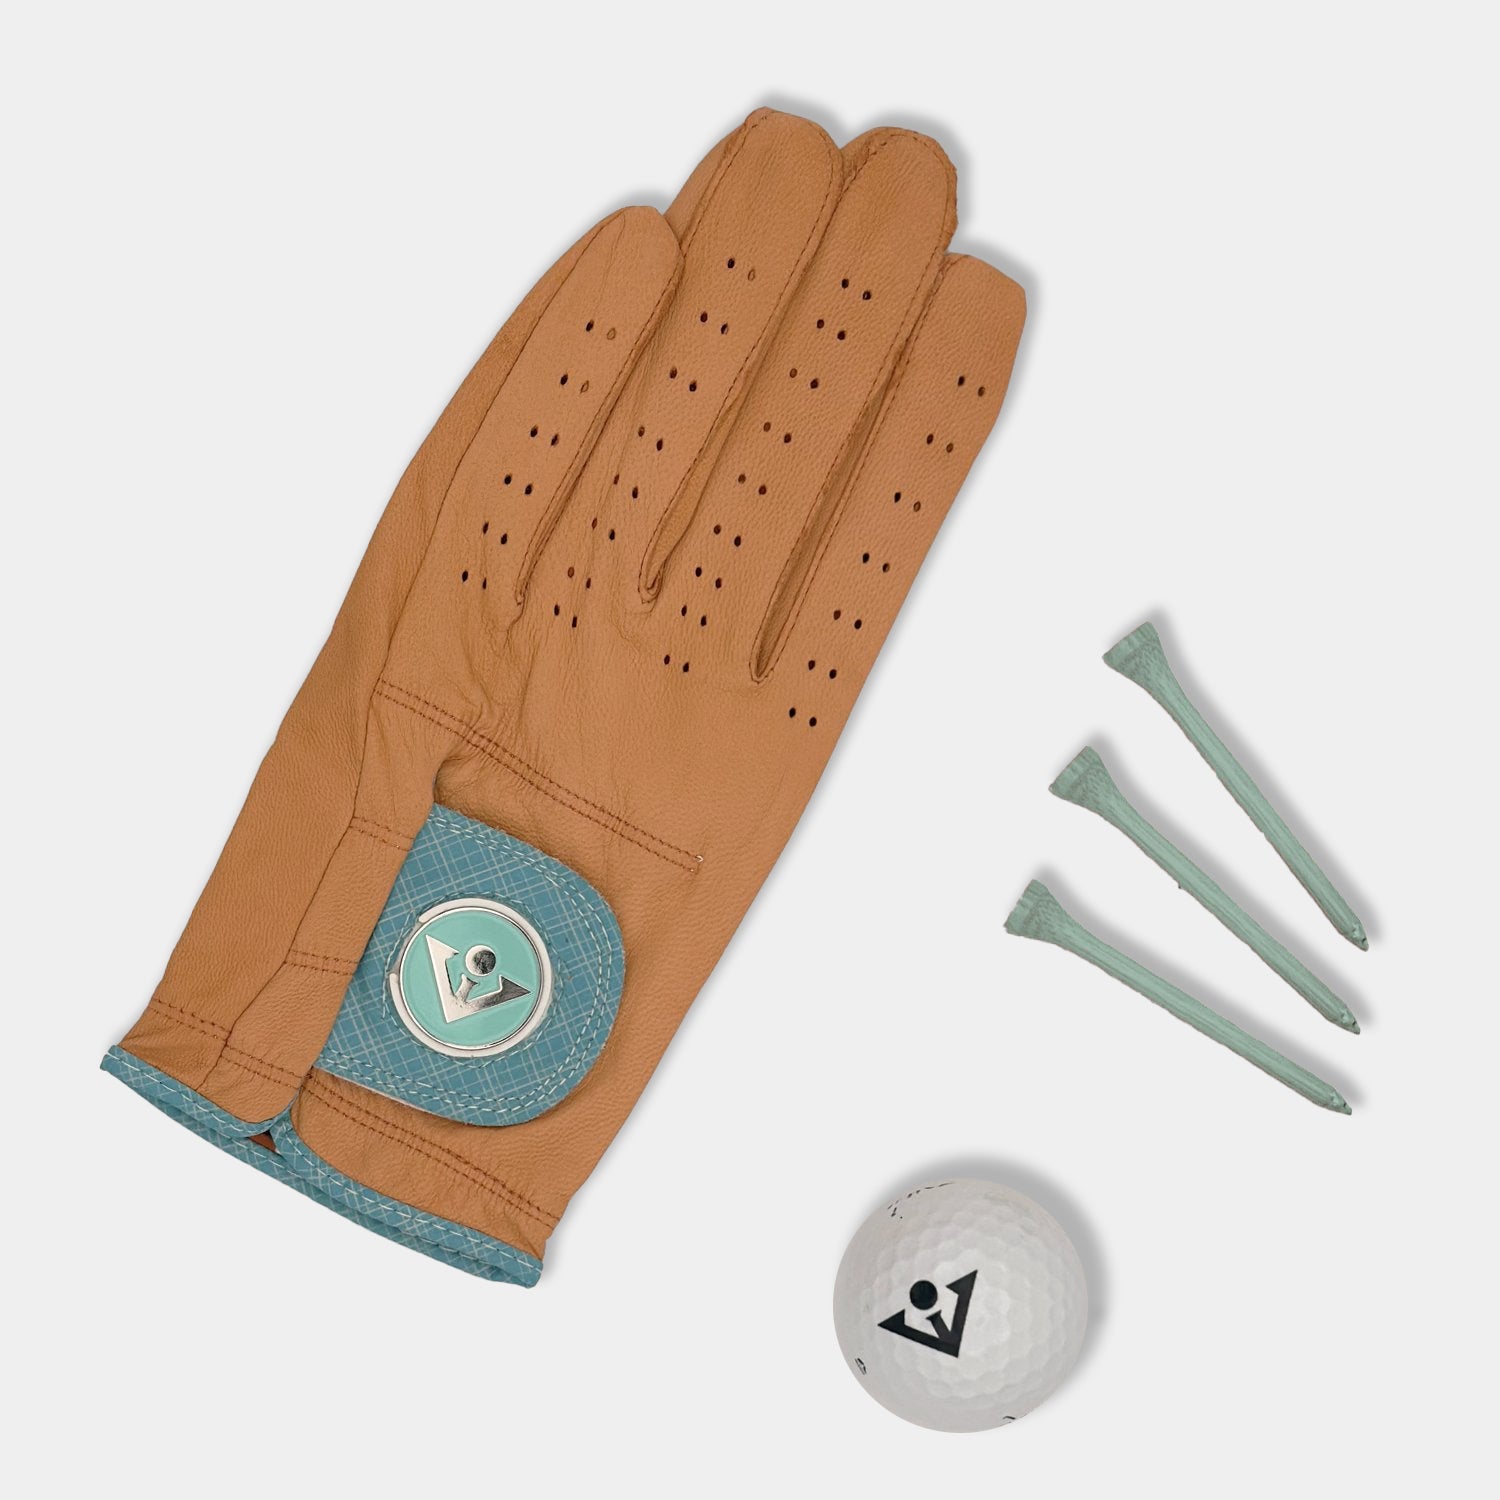 Men's blue and orange golf glove with tees and a ball with VivanTee logo laid next to it.